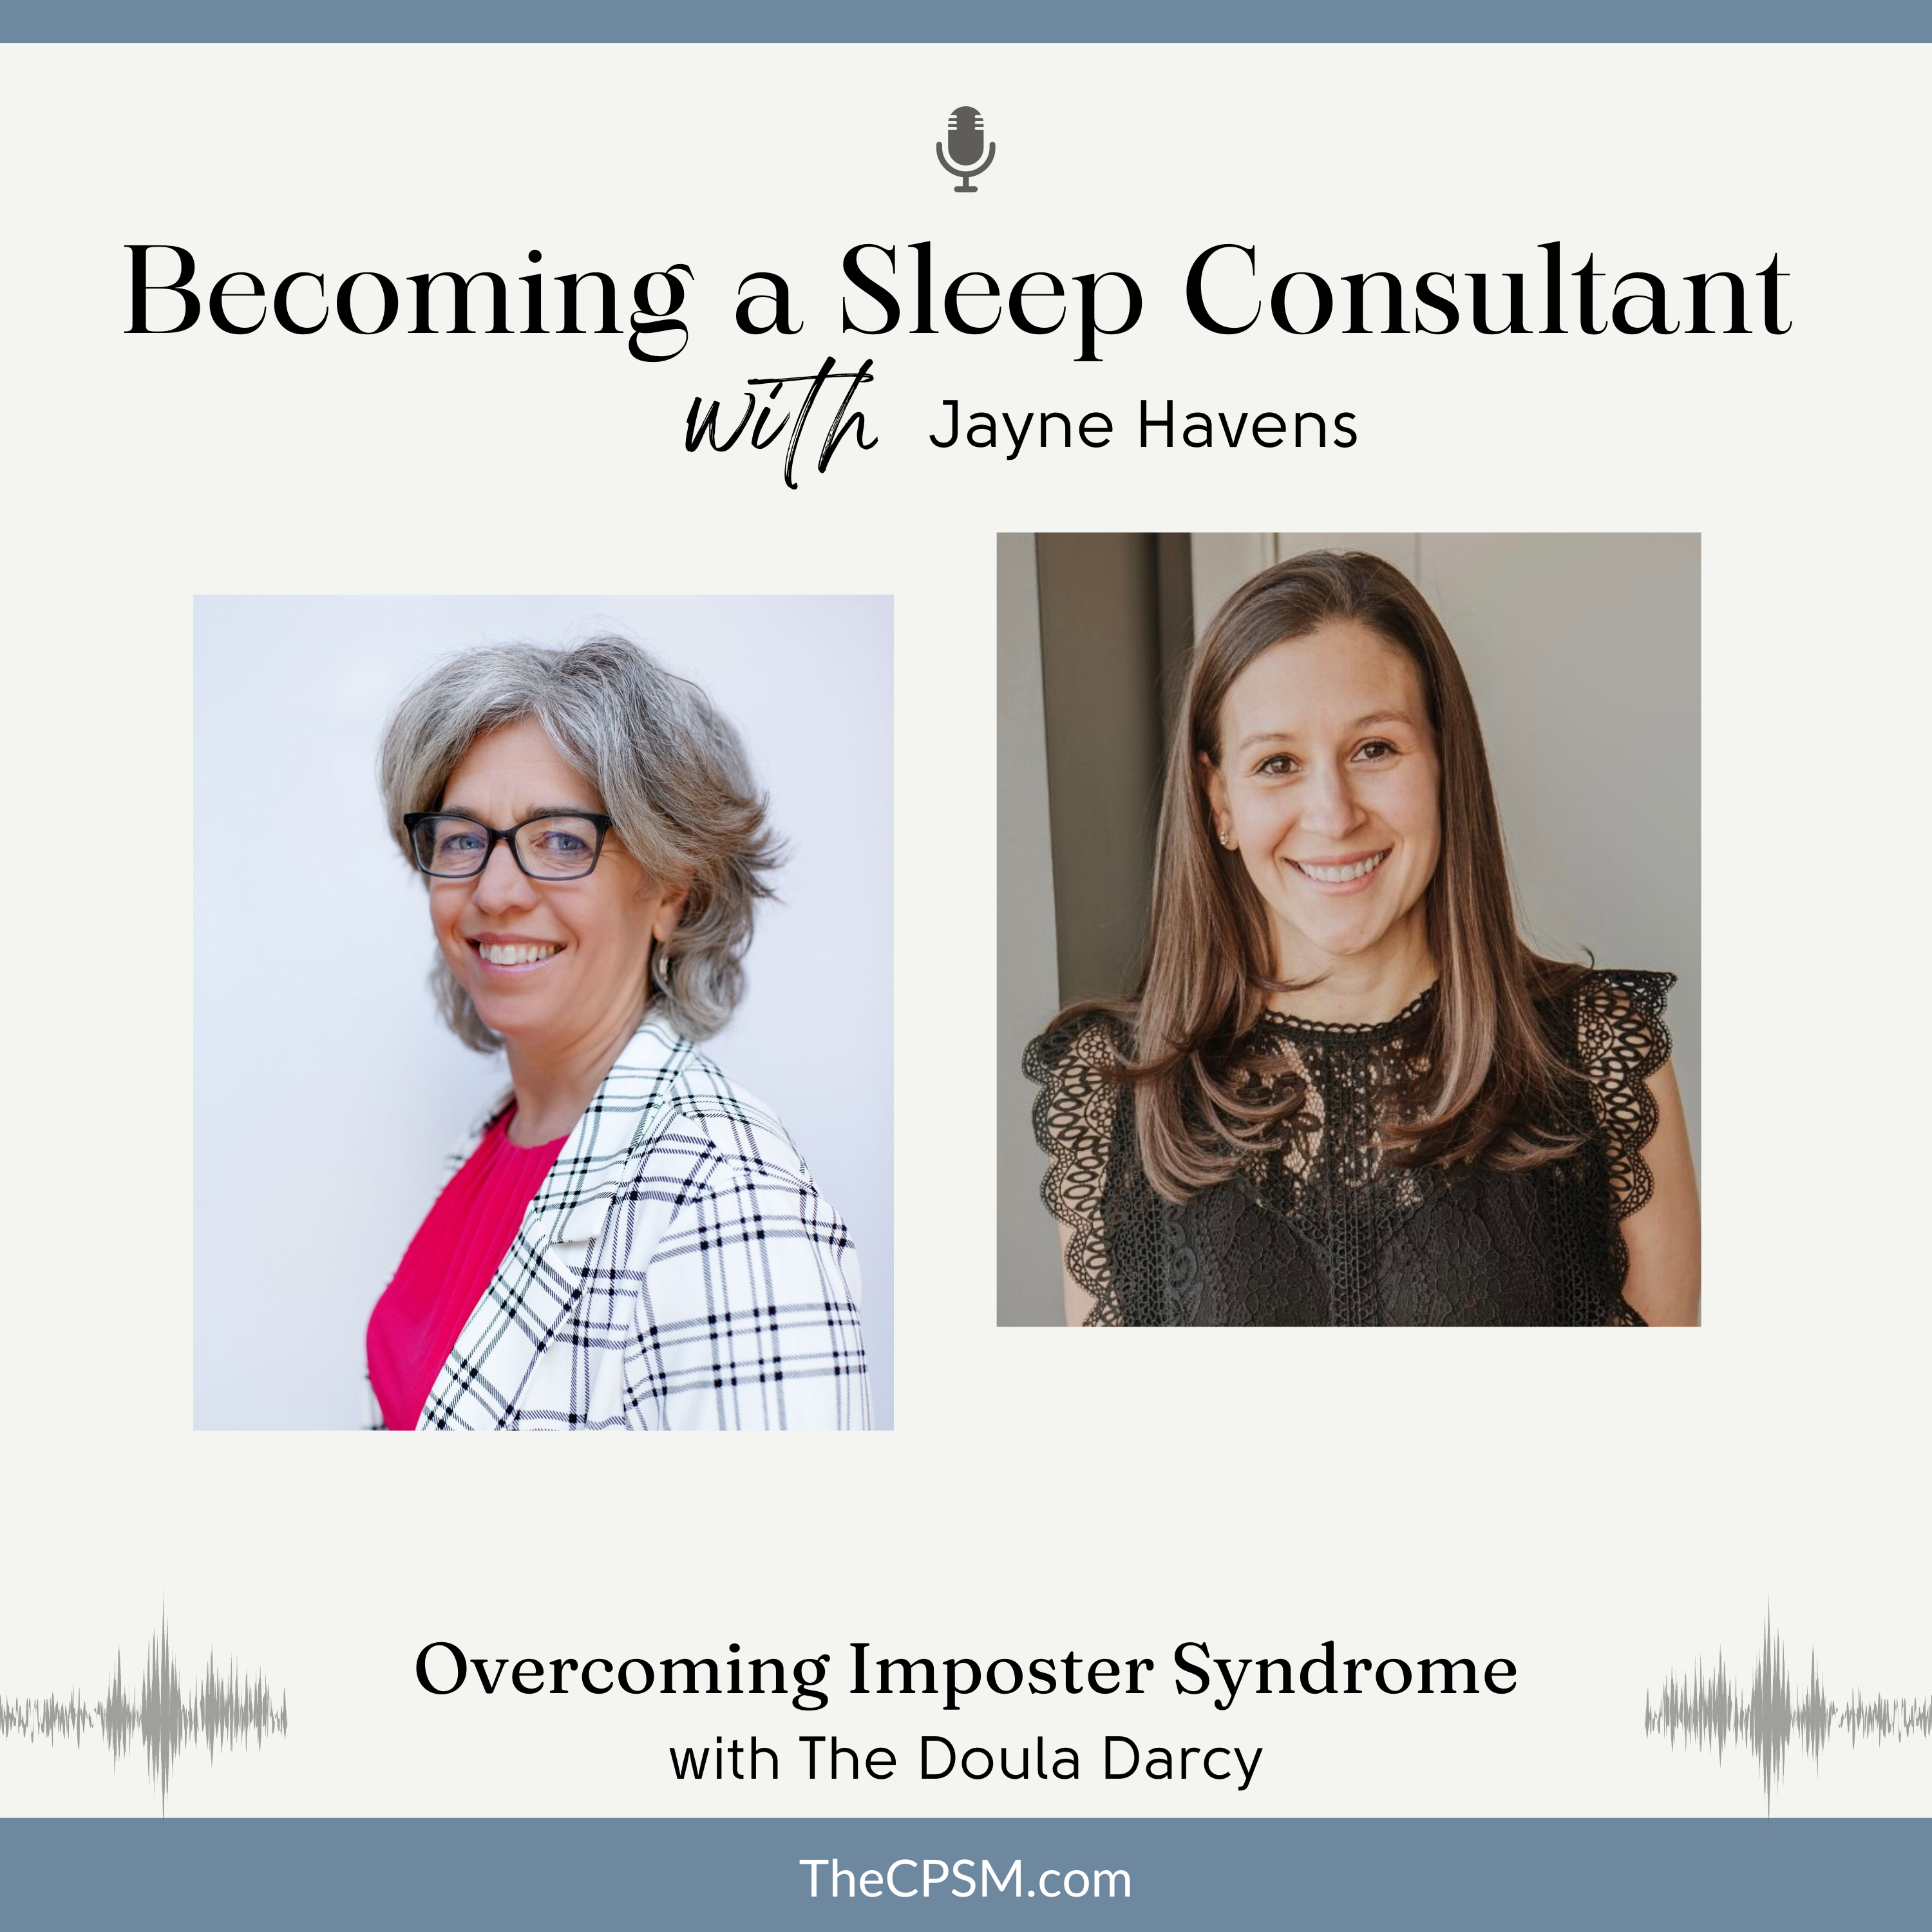 Overcoming Imposter Syndrome with The Doula Darcy